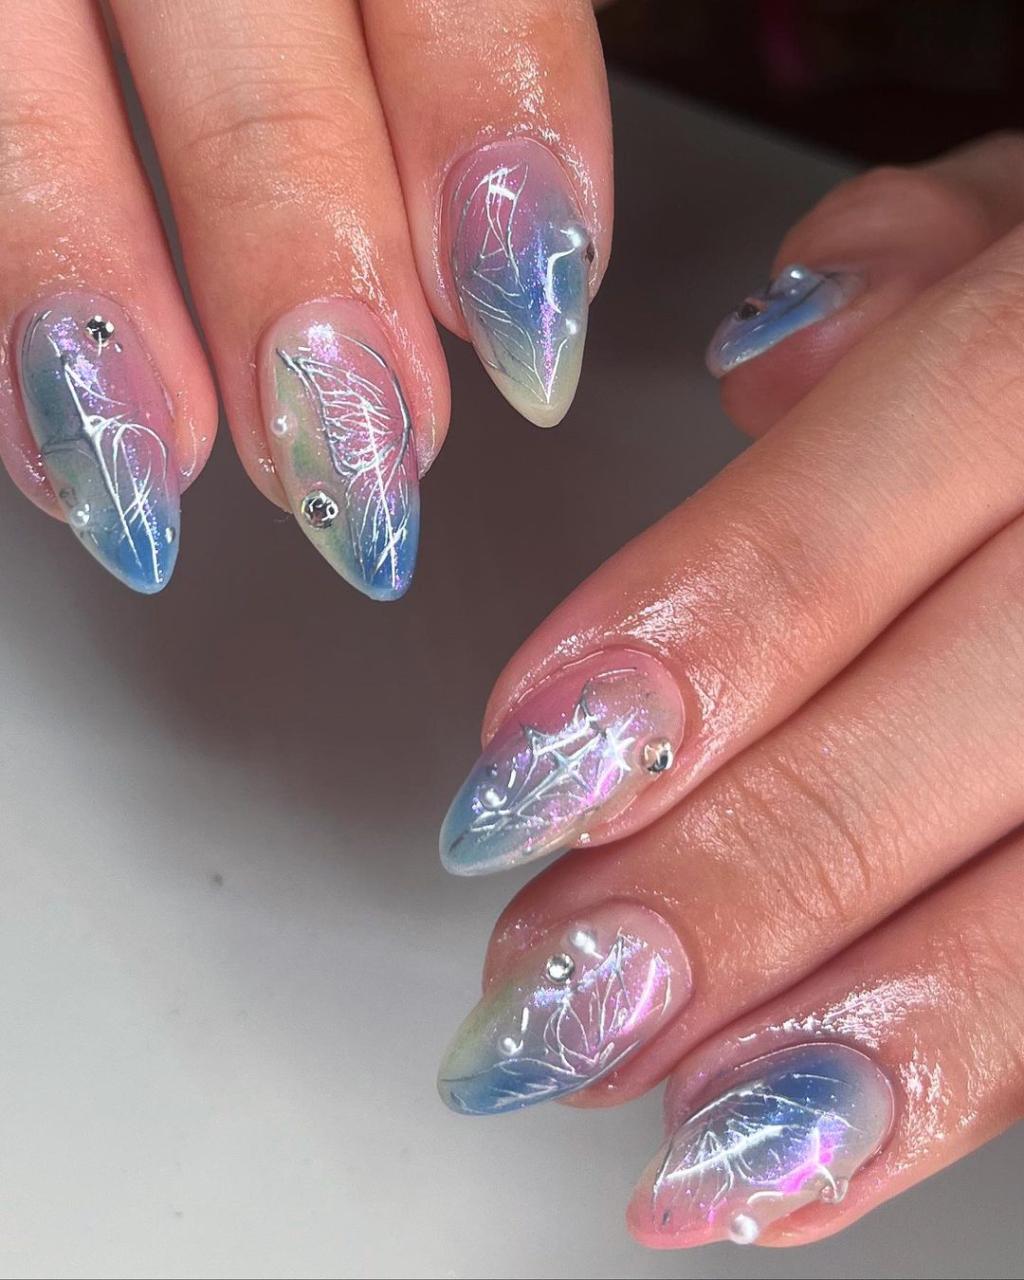 Here are more than 35 nail designs leading this year’s trends